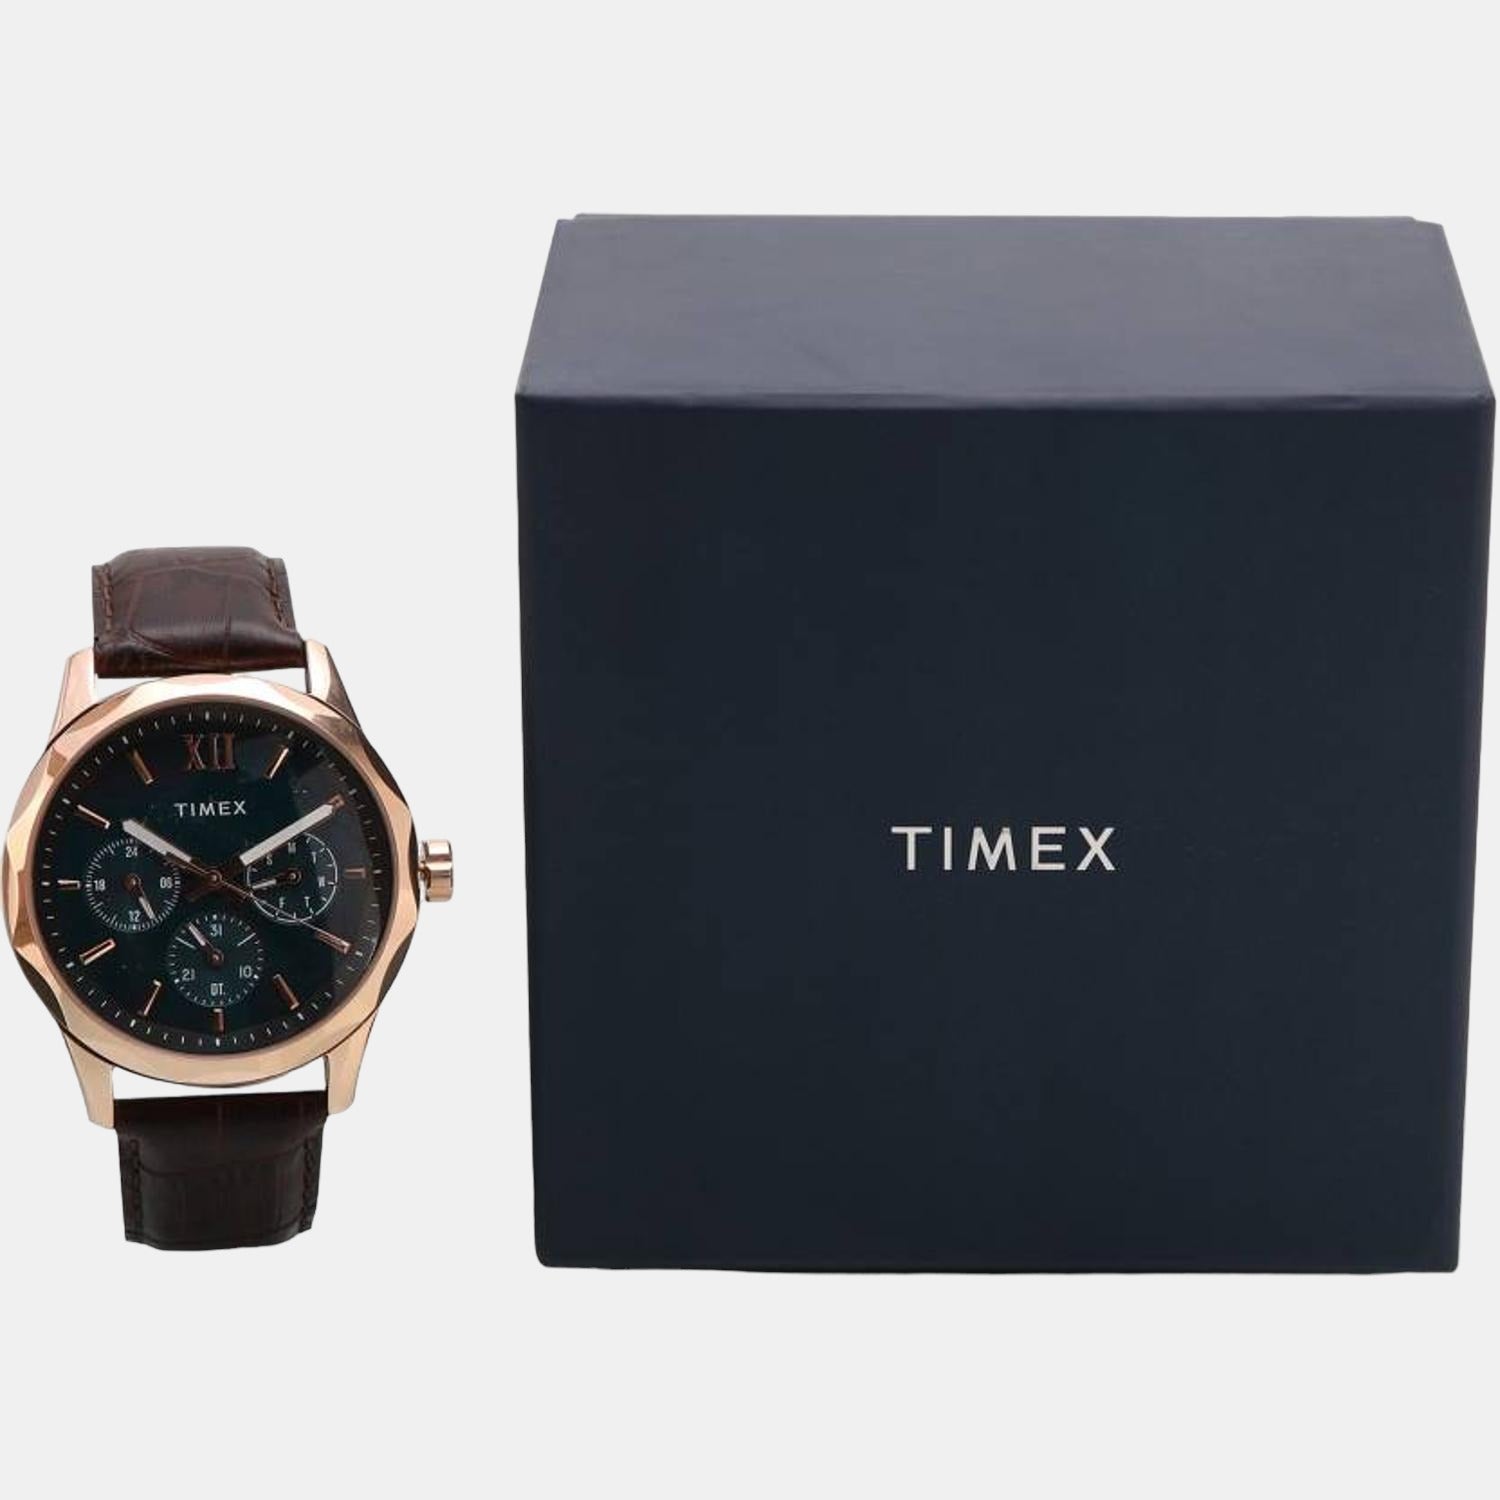 Do Timex watches last? - Quora